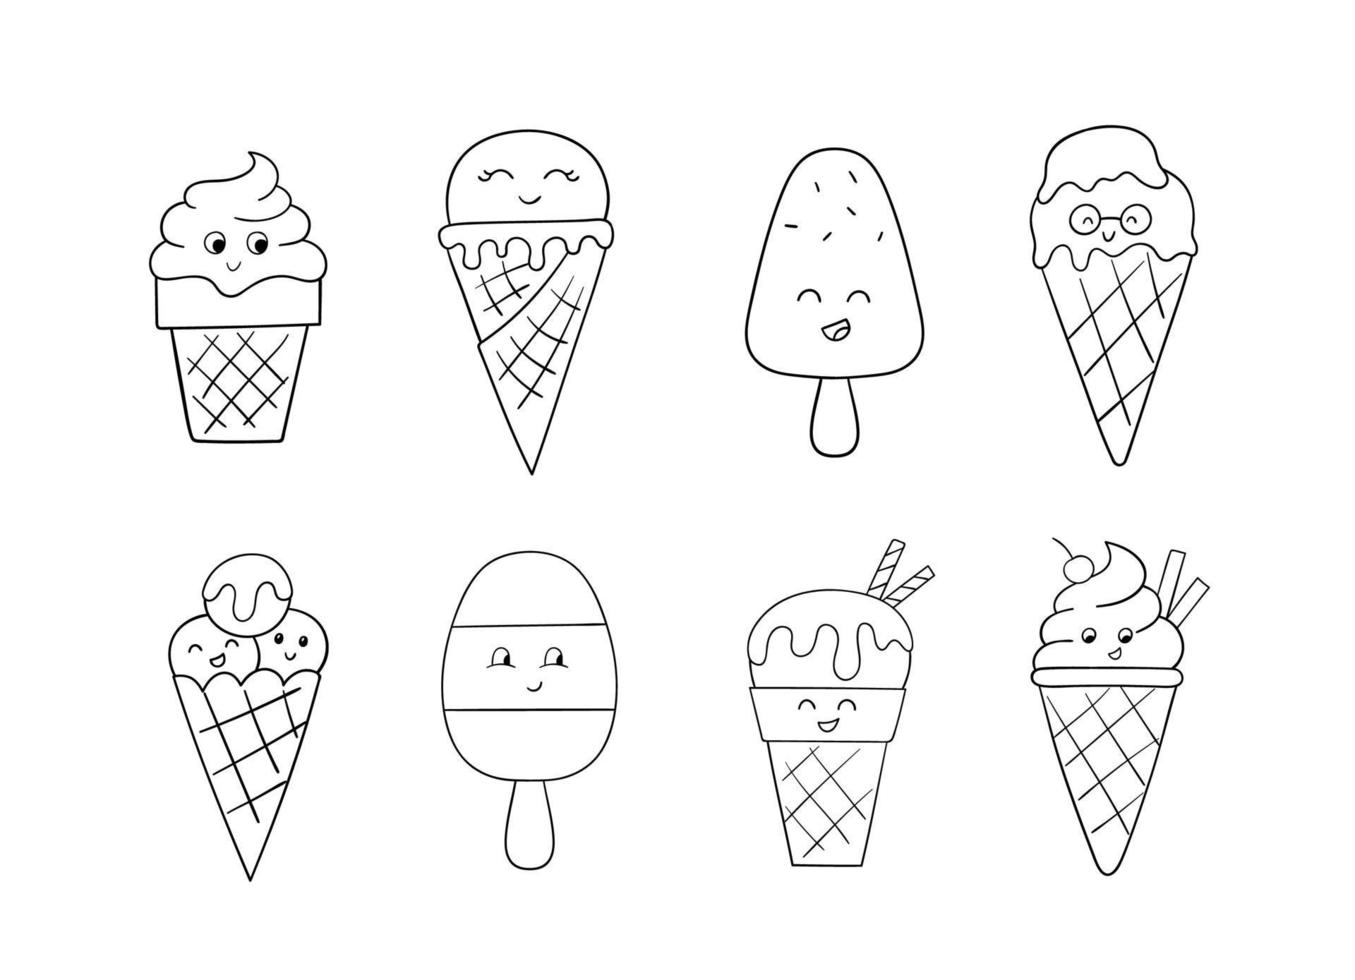 Cute ice cream characters set. Doodle sketch. Linear illustration isolated on white background. vector